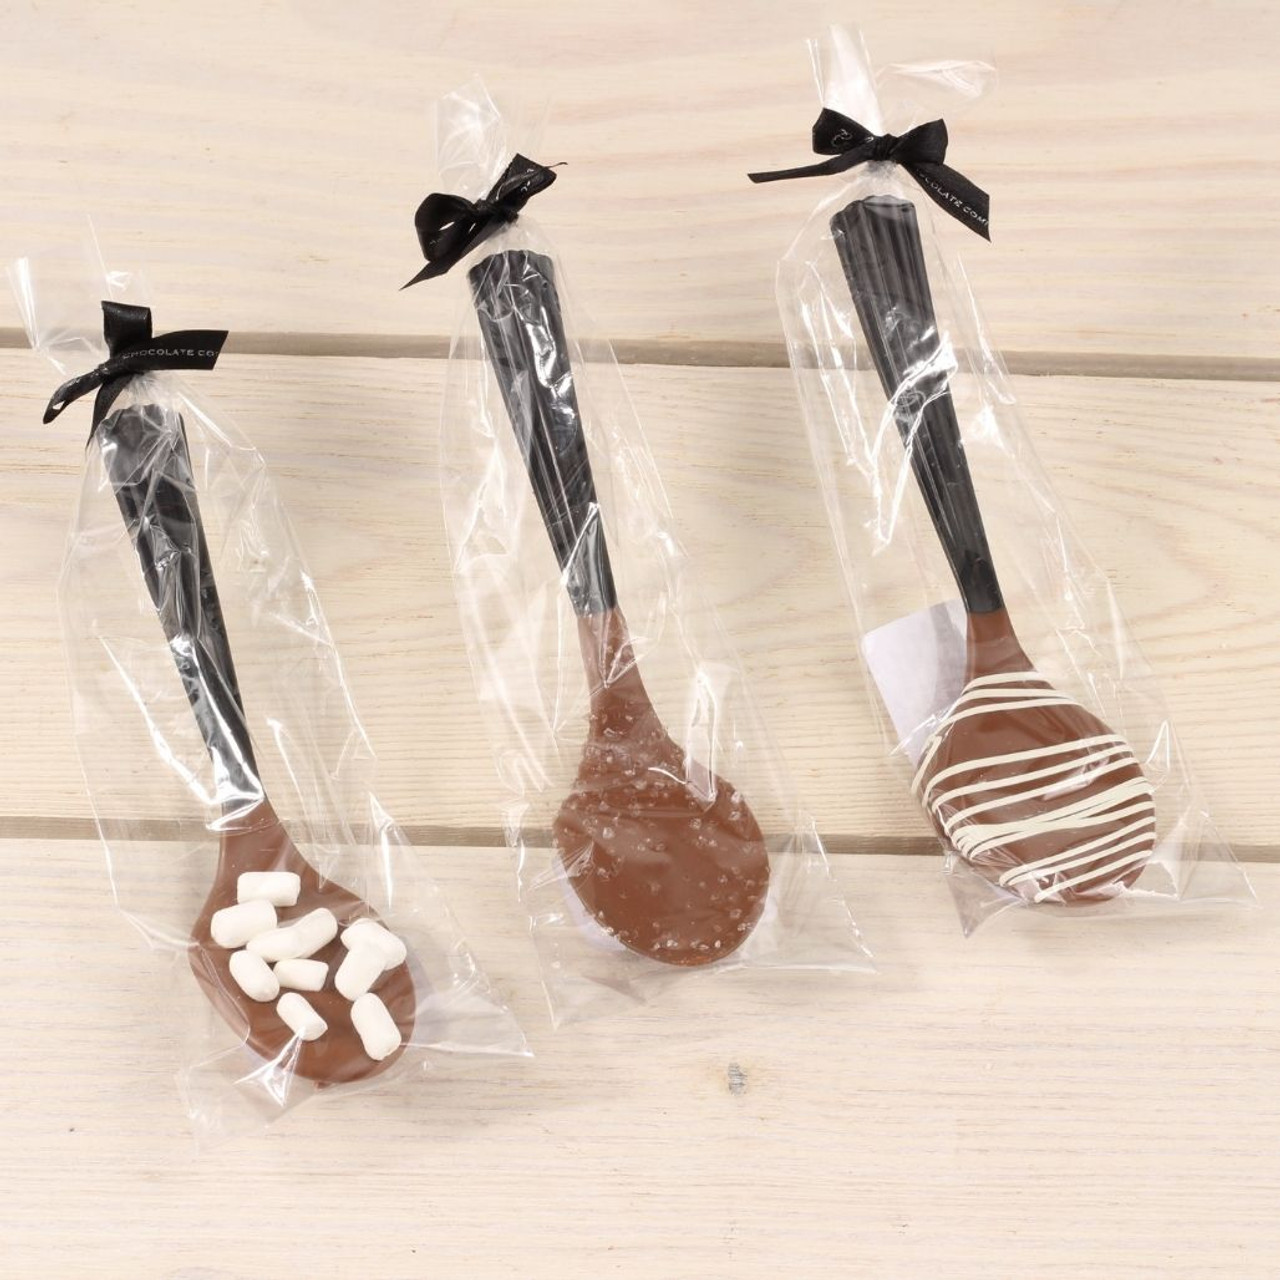 Hot Cocoa Stir Spoons, Set of 3 Holiday Flavors